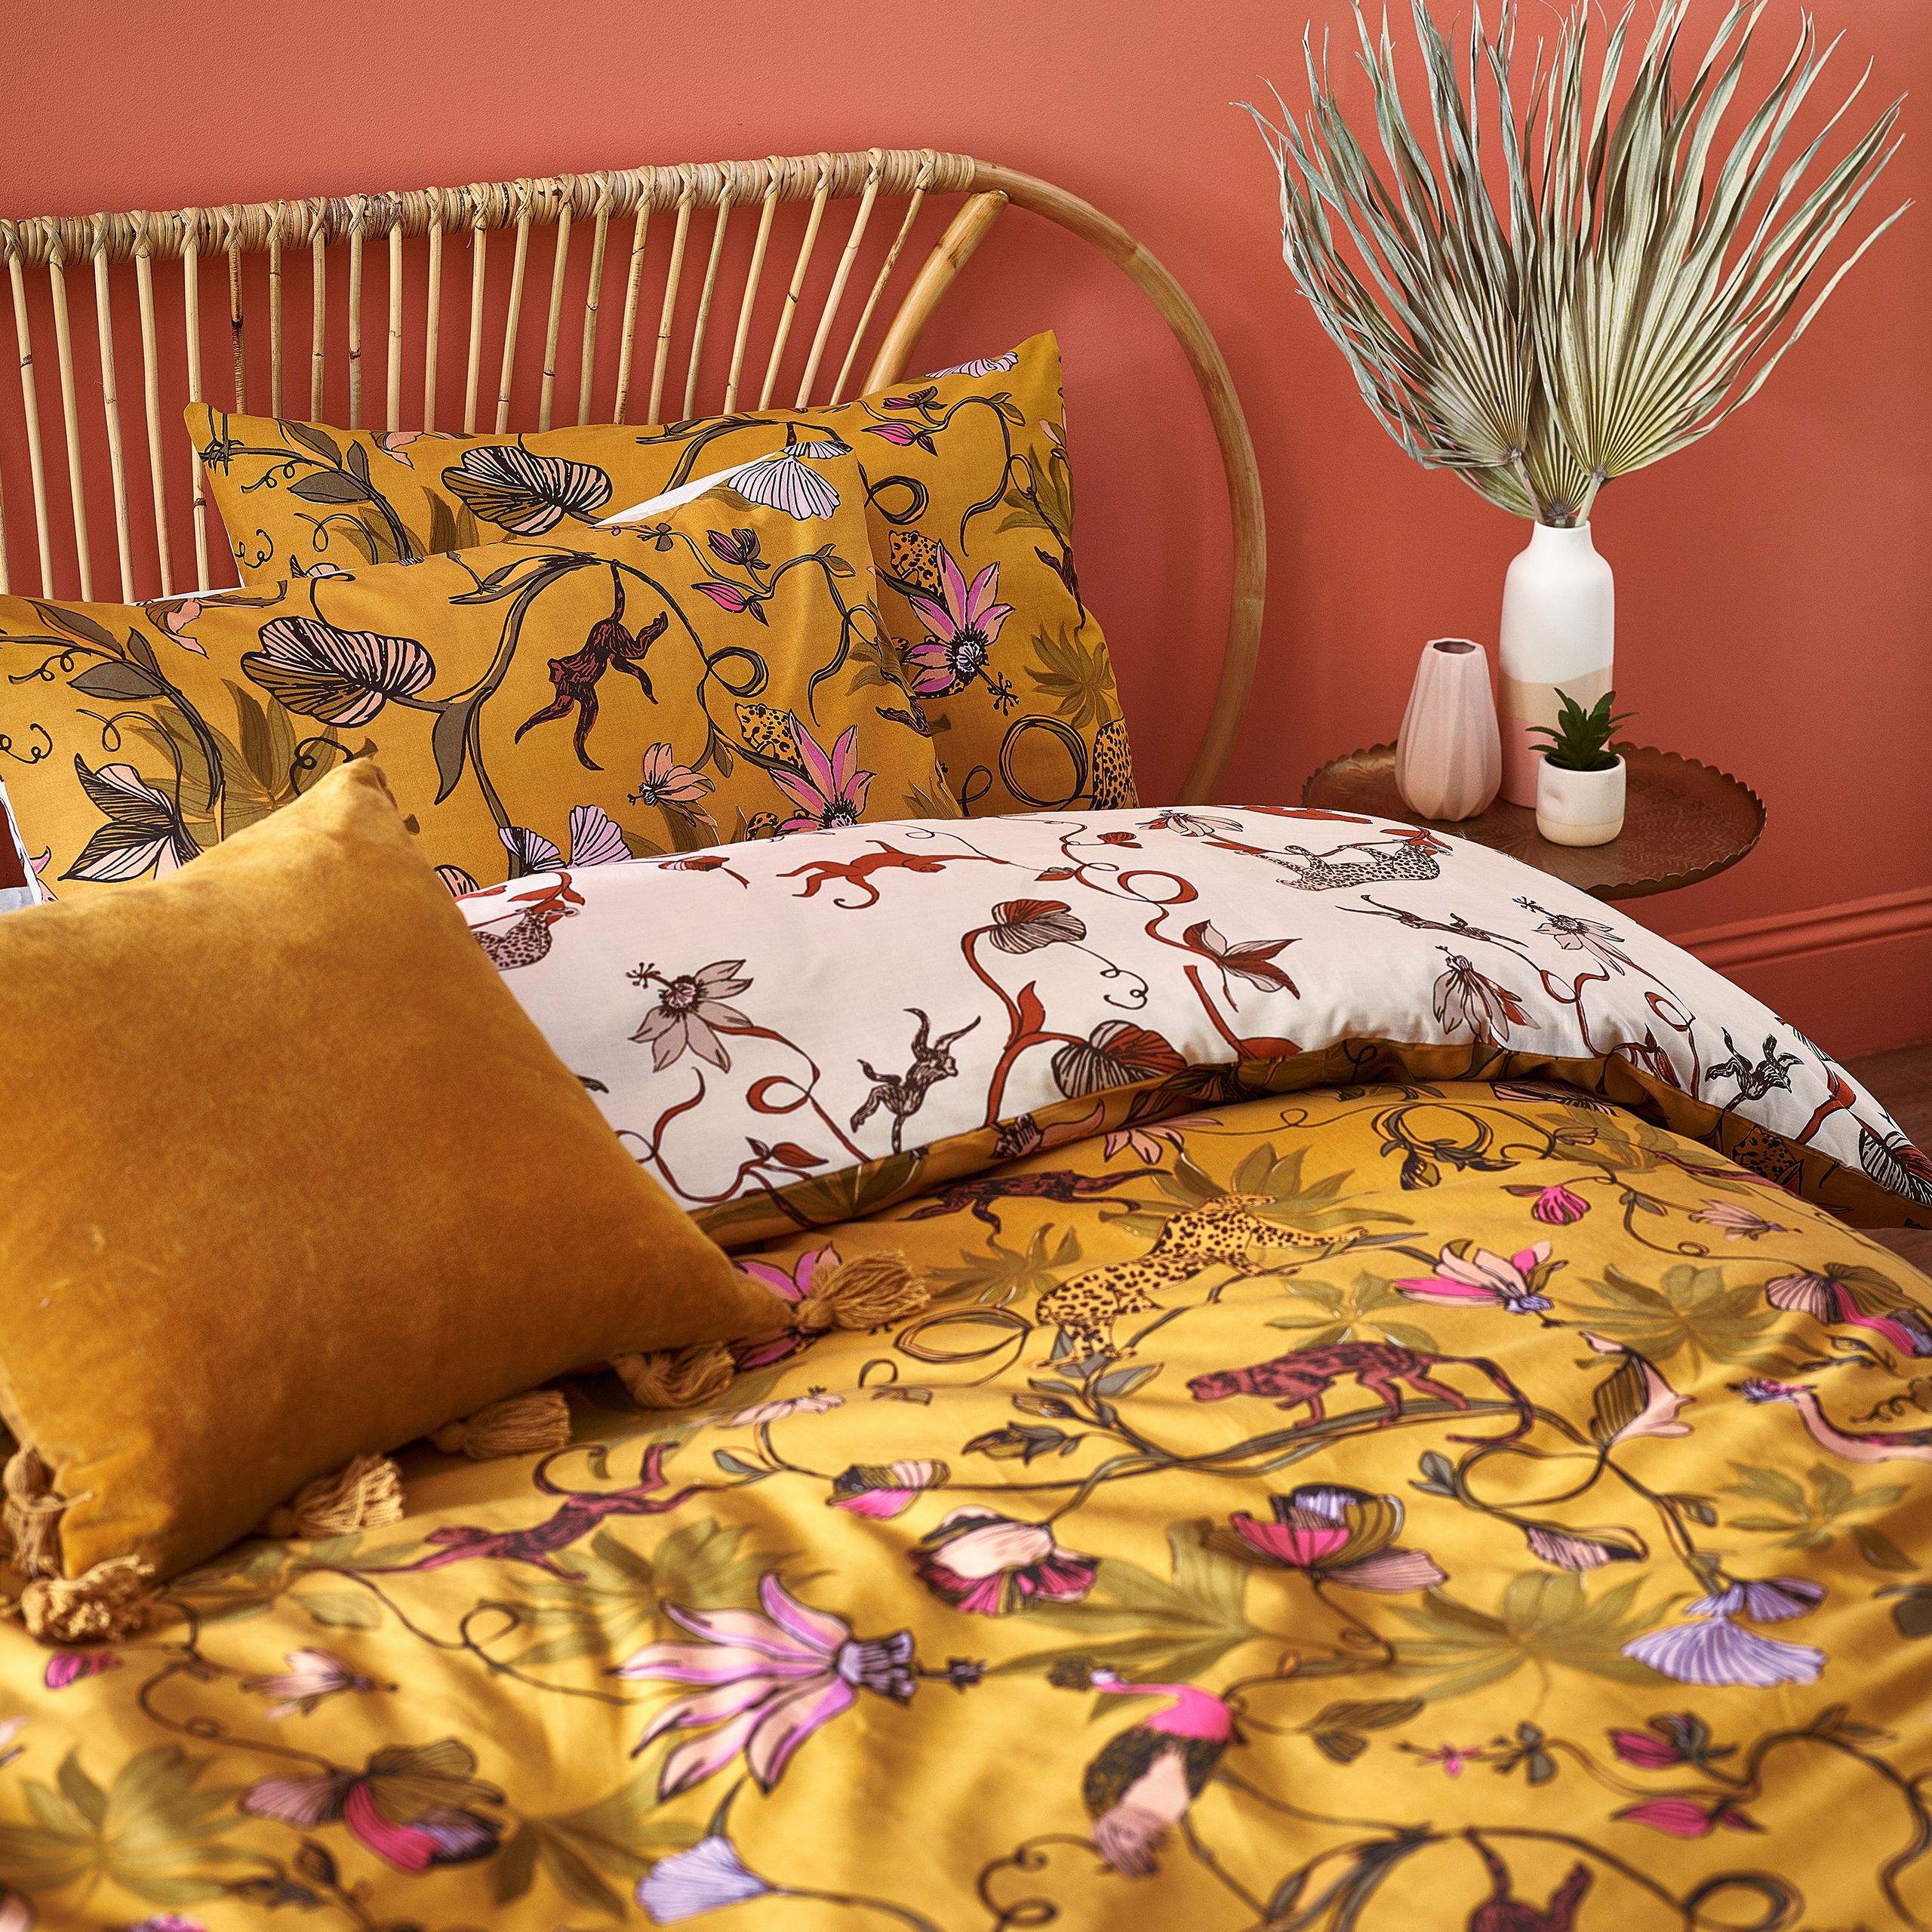 Add some wildlings to your bedroom with this duvet set featuring a lively print of monkeys swinging from vines, exotic birds, and cheetahs in tropical foliage. The exotic print covers the reverse against a neutral base so you can switch the look when you need to.